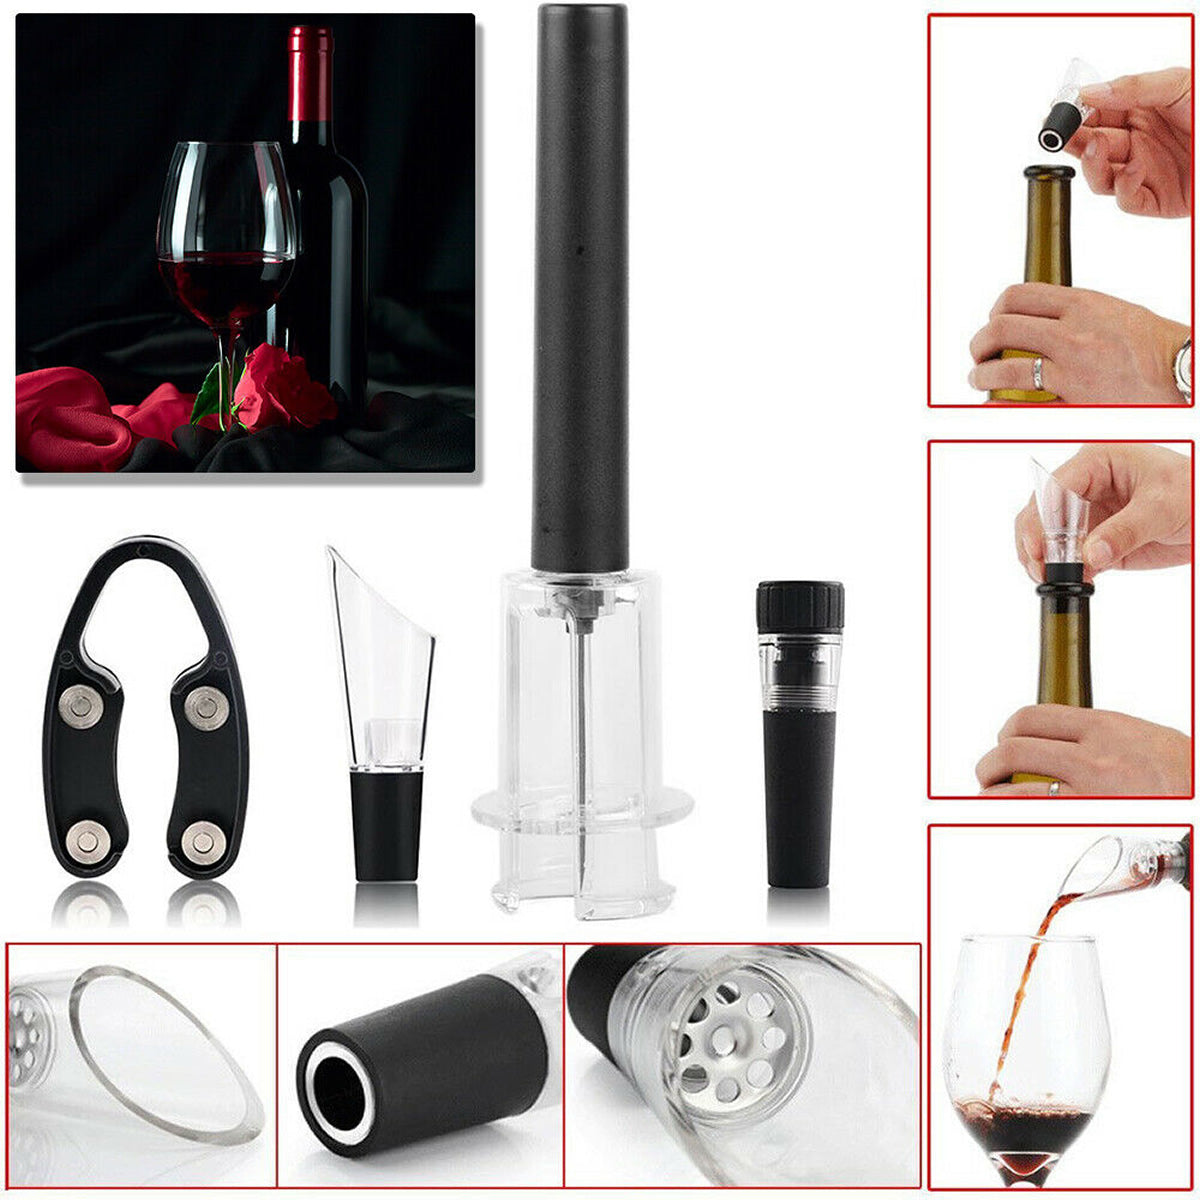  Pour And Preserve Set of 4 Foil Cutter Air Wine Opener Aerator And Wine Stopper by VistaShops VistaShops Perfumarie